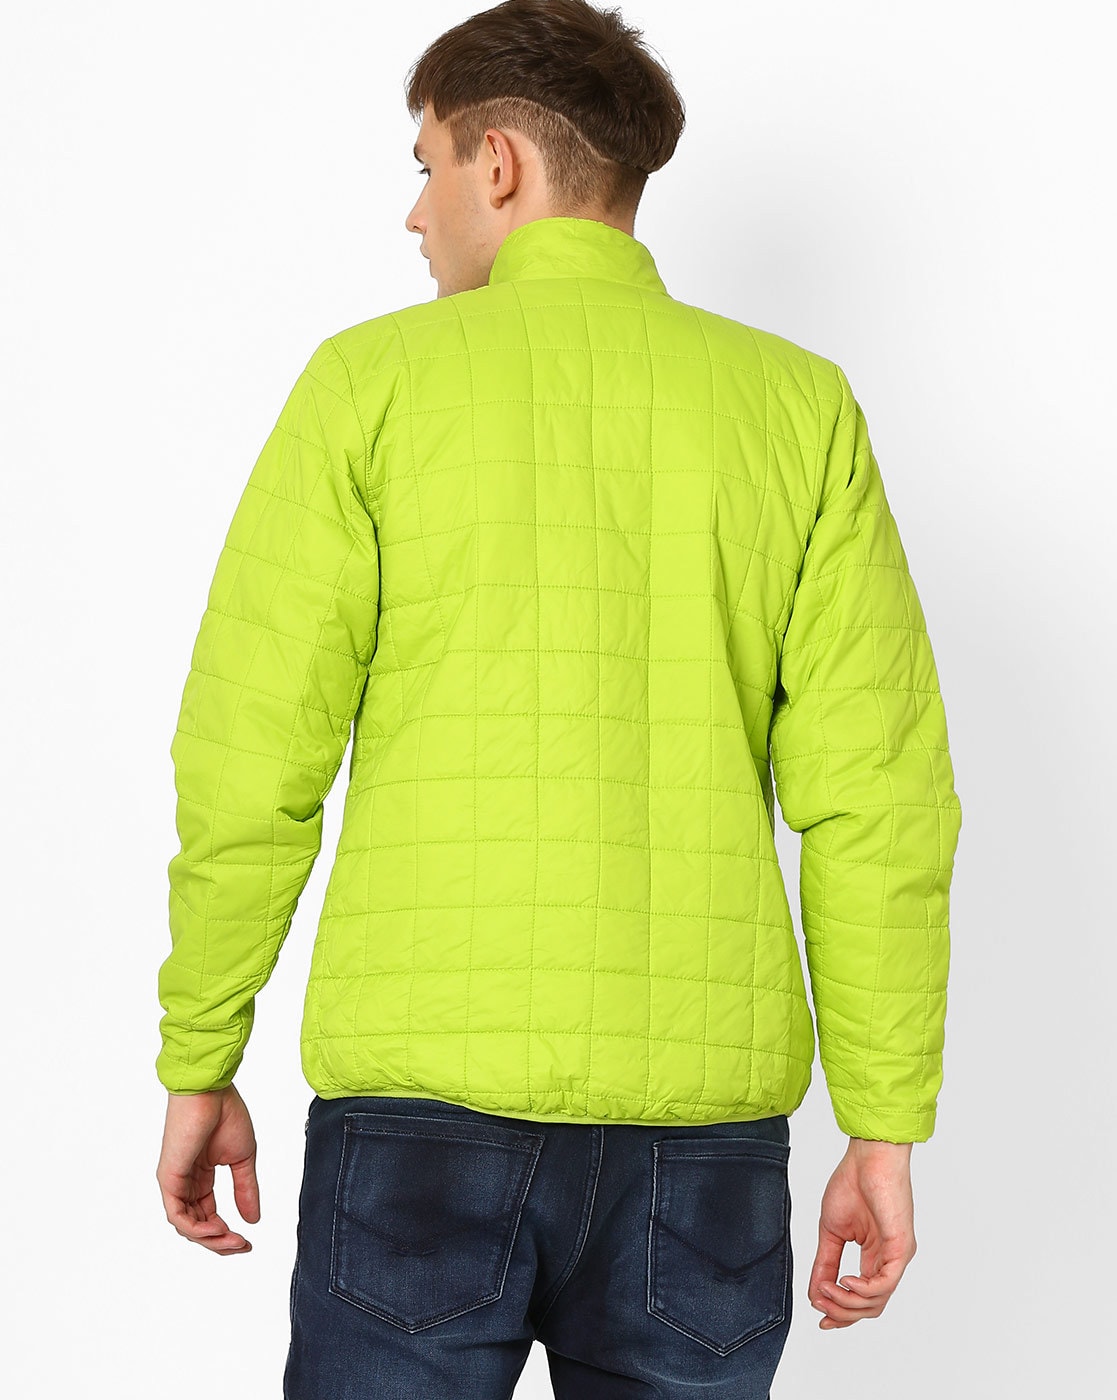 Indiahikes - We just tried out this Micro-loft jacket by Wildcraft and  we're quite impressed! It's hard to come across such light jackets that are  not steeply priced and yet keep you